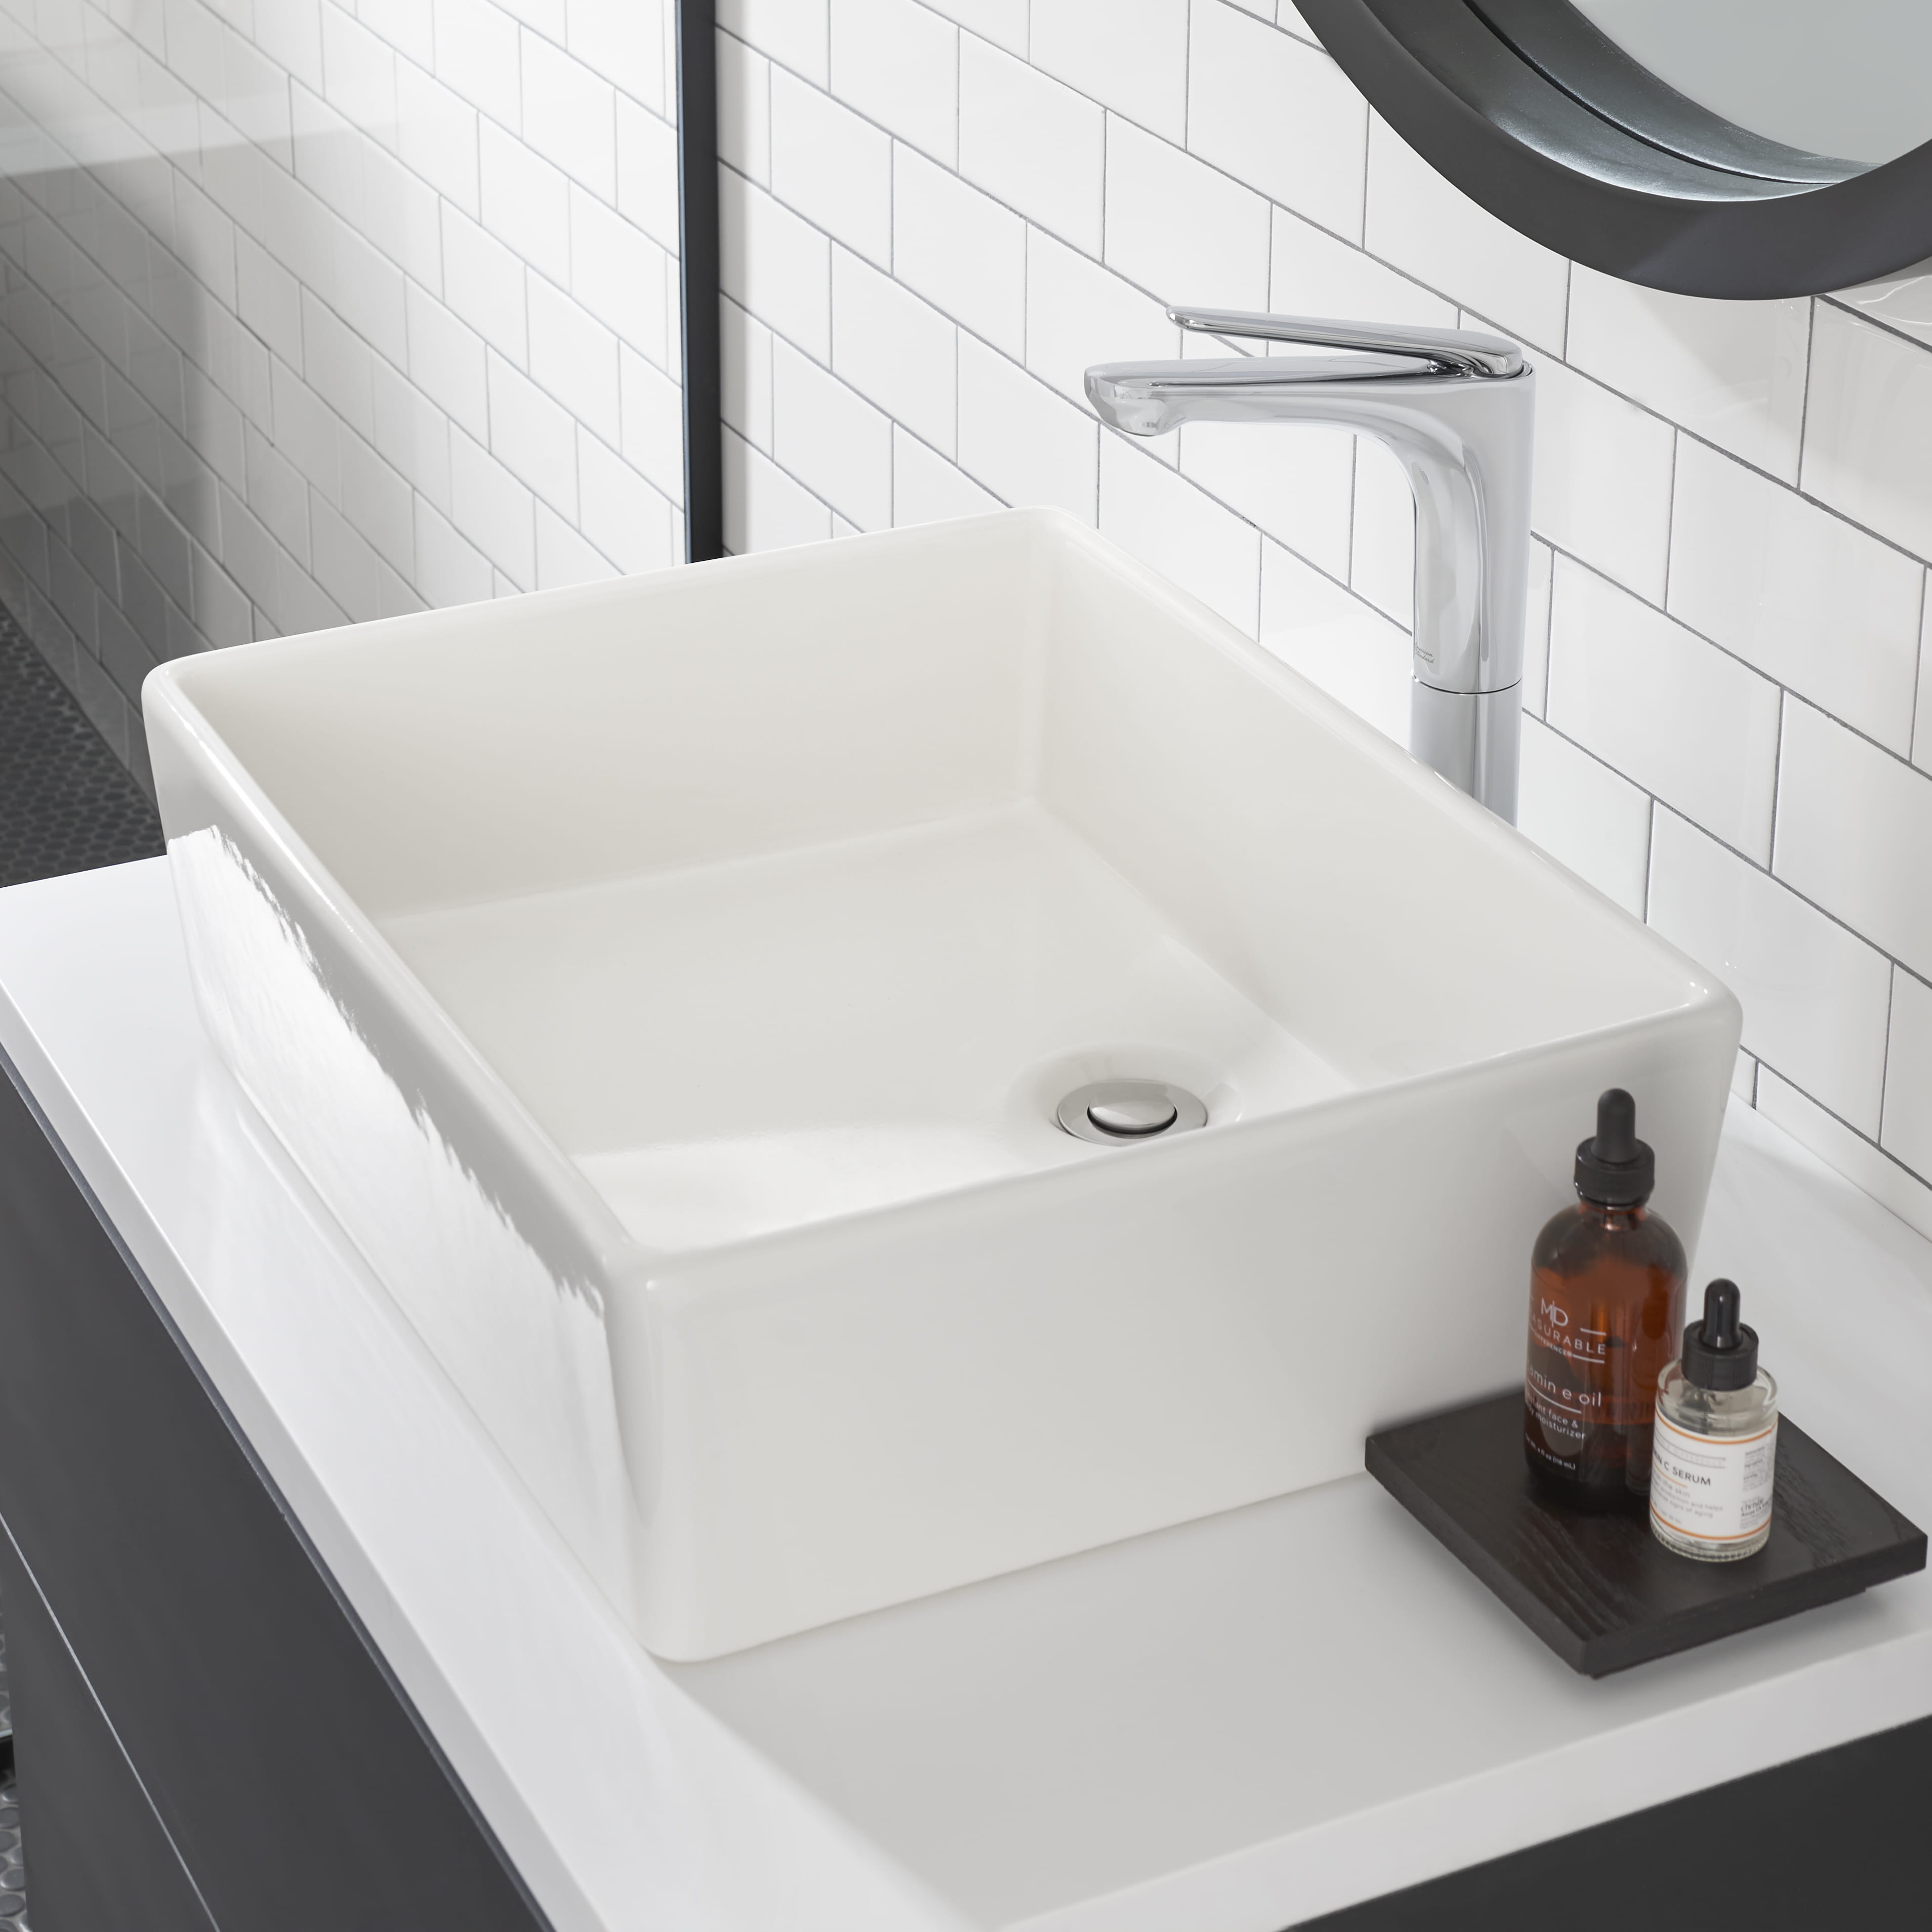 How to Choose the Best Sink for Your Bathroom